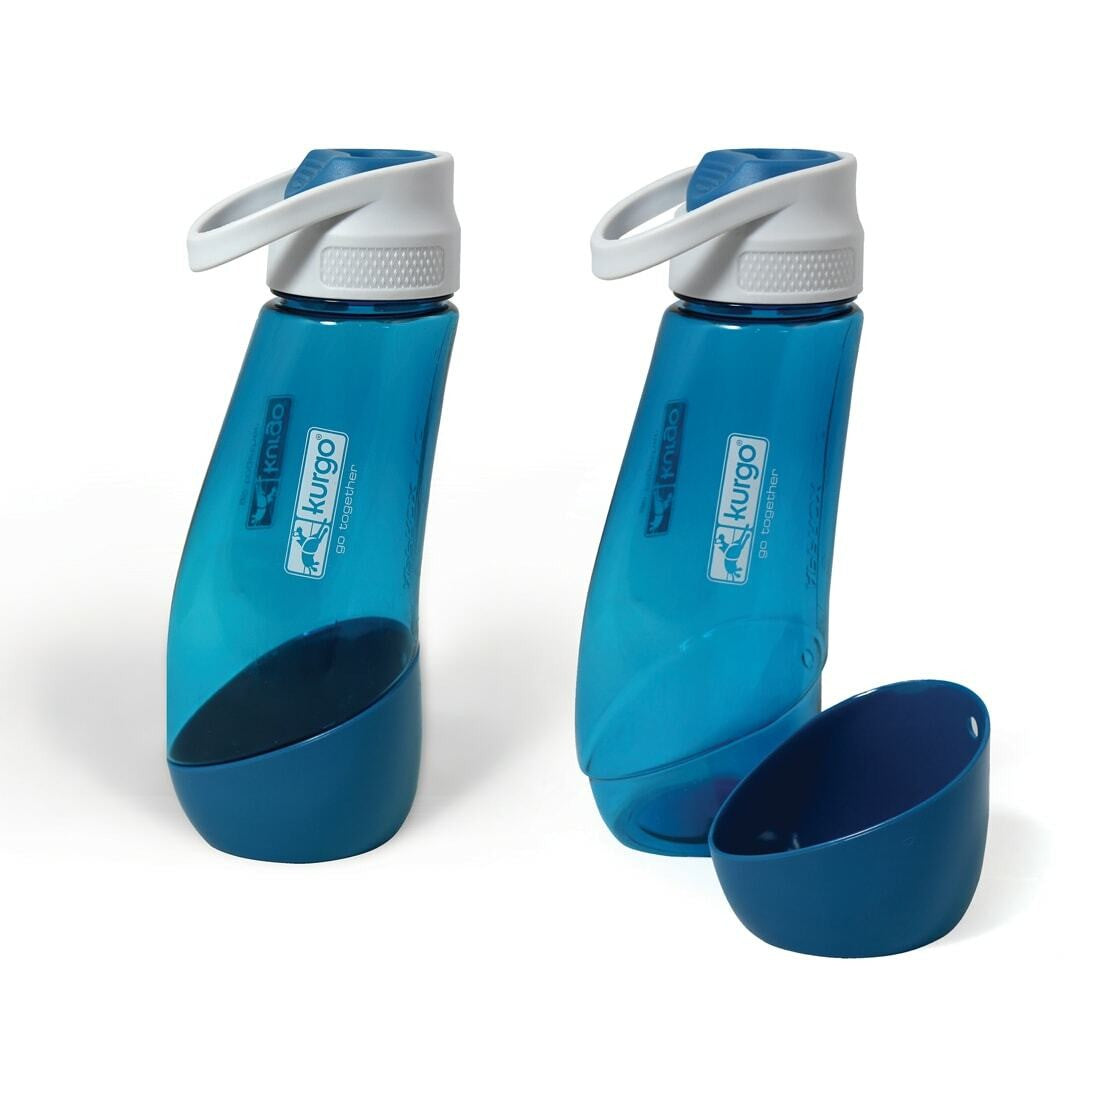 Two blue water bottles with open caps and logos on white background.